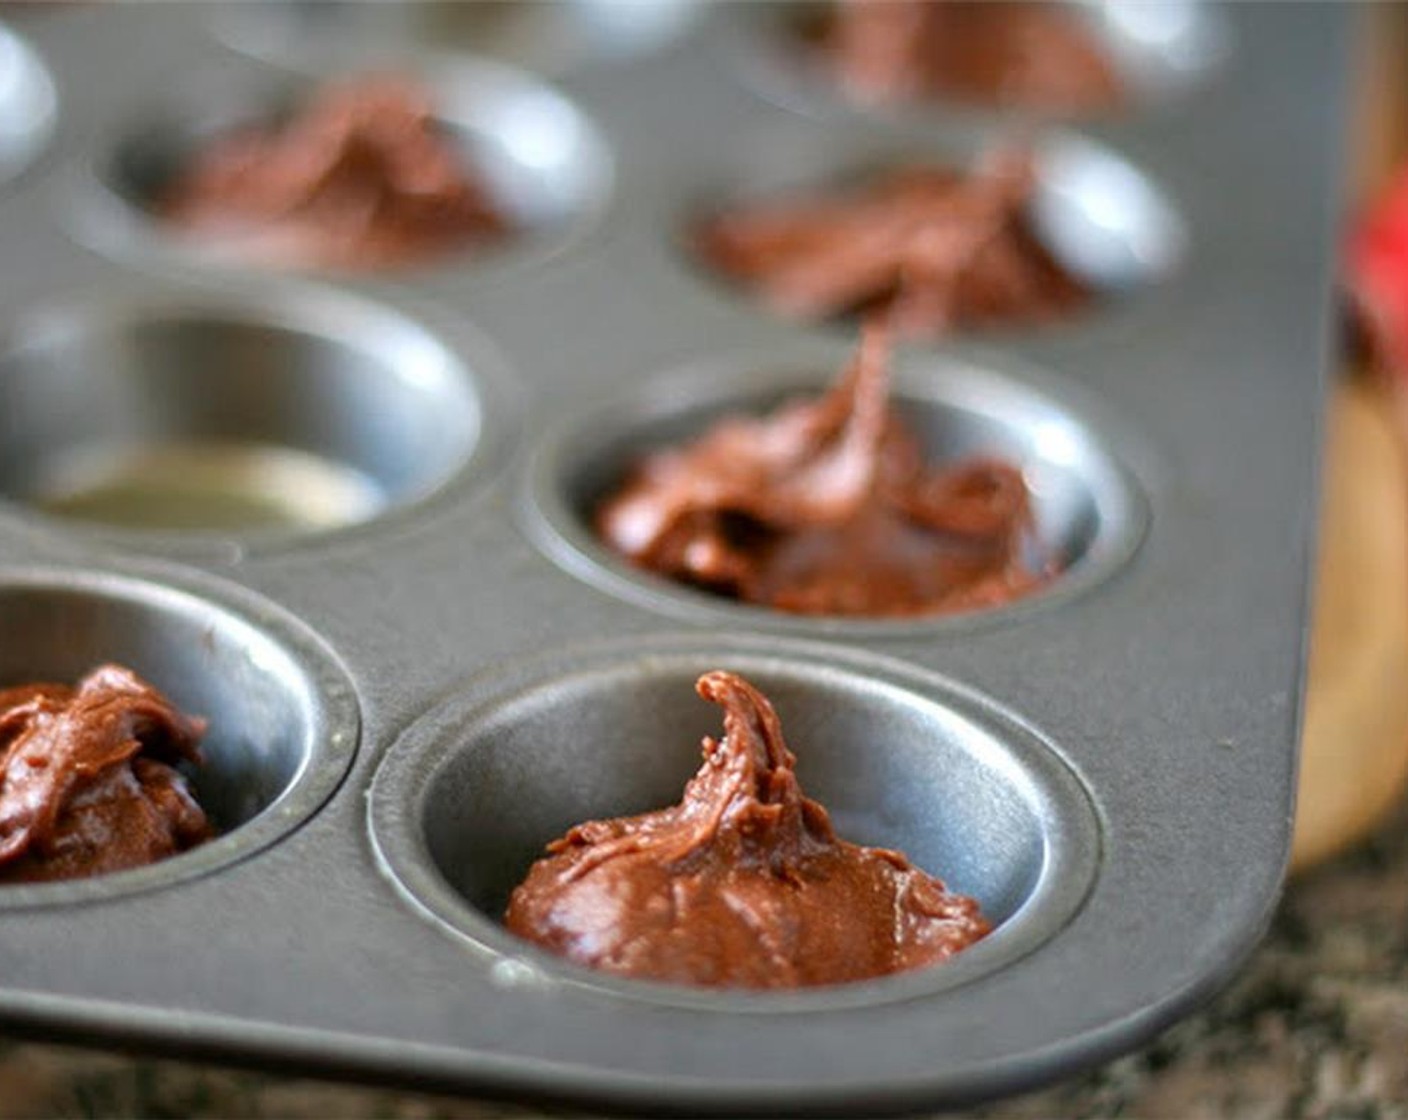 step 2 Drop them into a mini muffin pan lightly greased with cooking spray. Bake for 10-12 minutes.